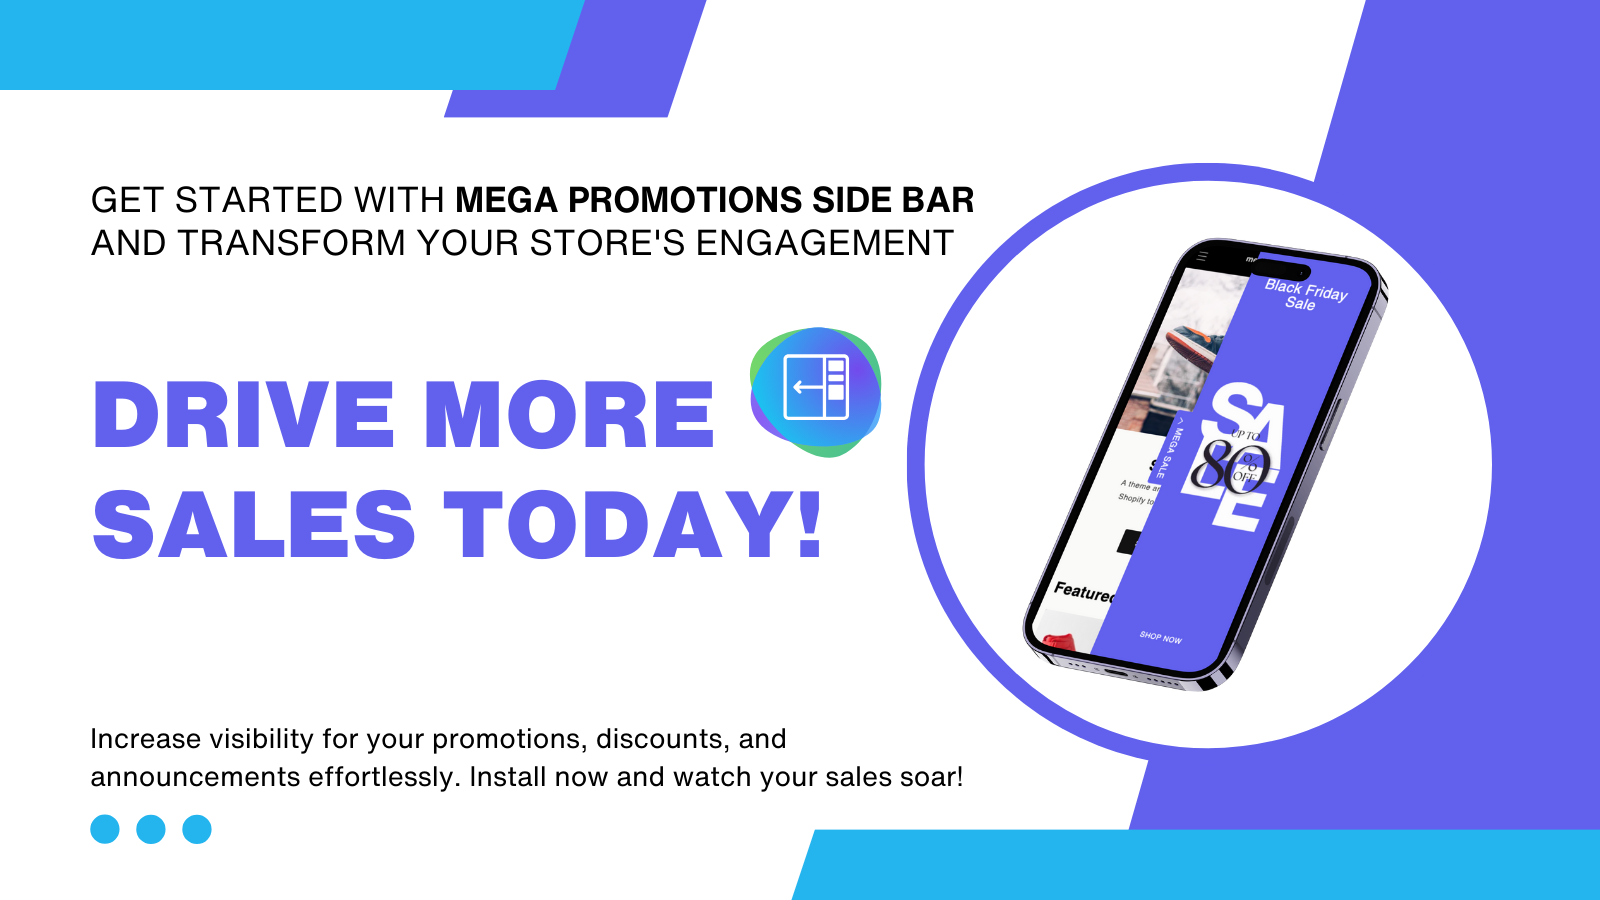 Mega Promotions Side Bar - Drive more sales to your store